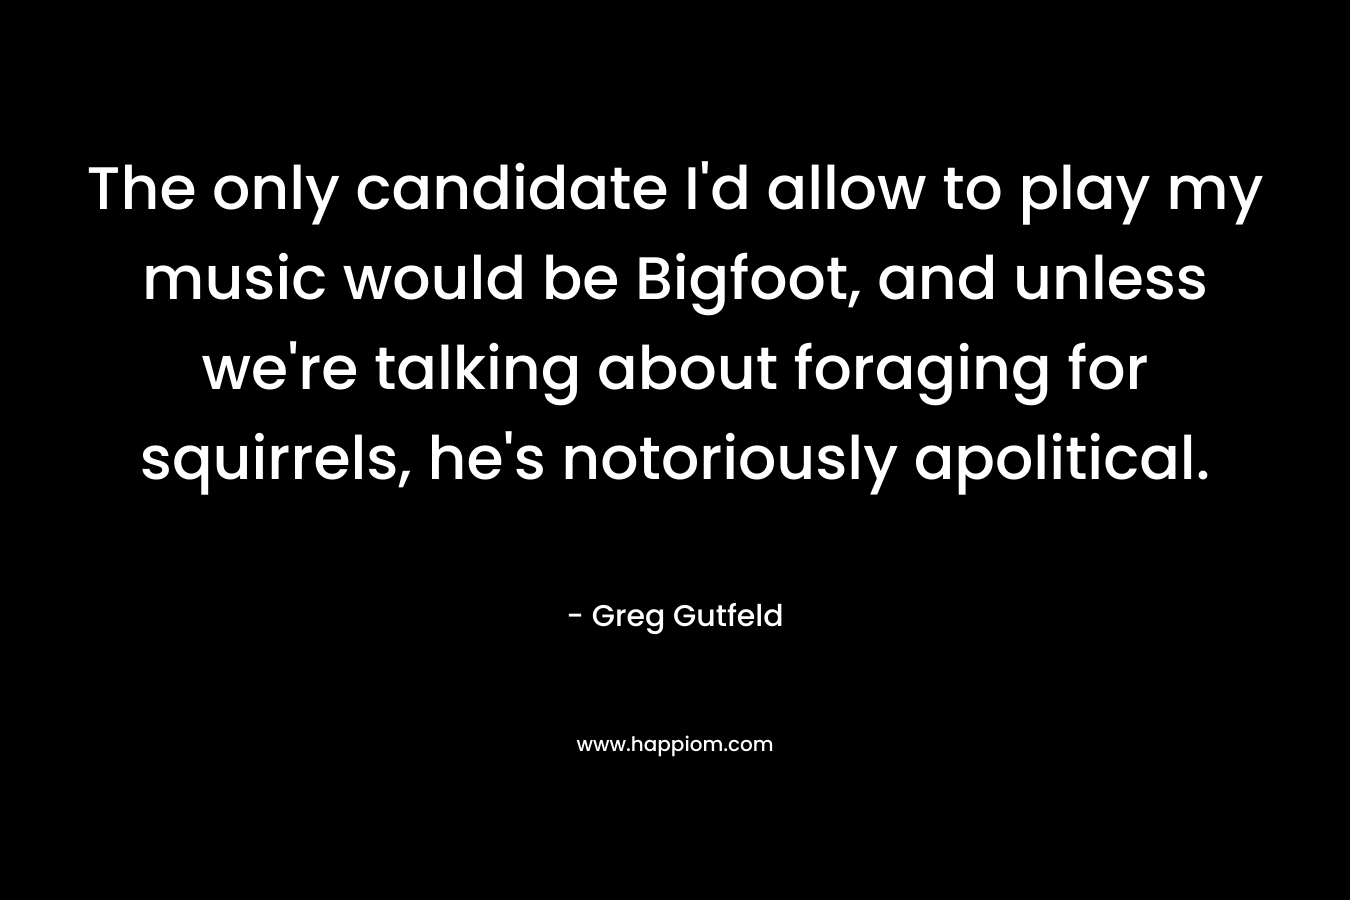 The only candidate I’d allow to play my music would be Bigfoot, and unless we’re talking about foraging for squirrels, he’s notoriously apolitical. – Greg Gutfeld